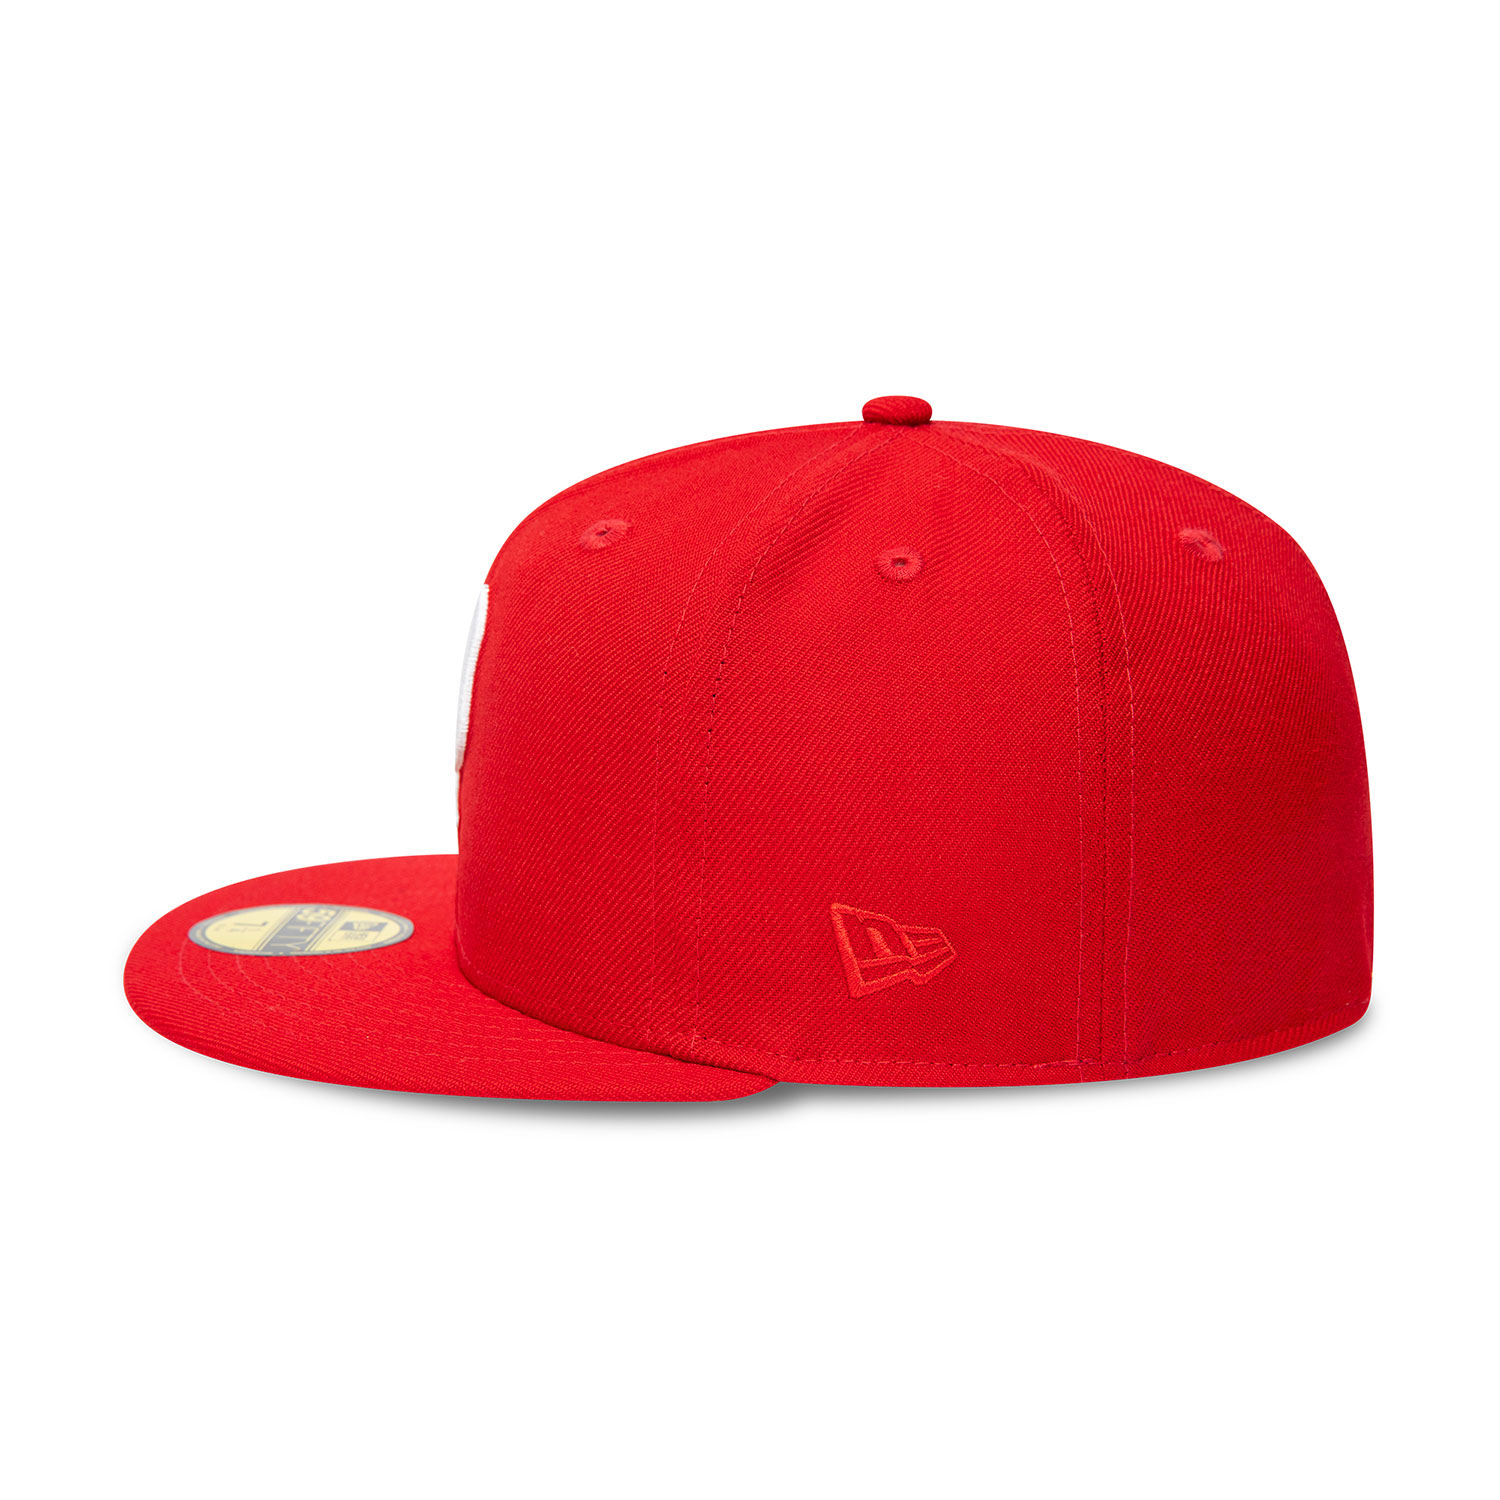 Official New Era Philadelphia Phillies MLB Red 59FIFTY Fitted Cap B8233 ...